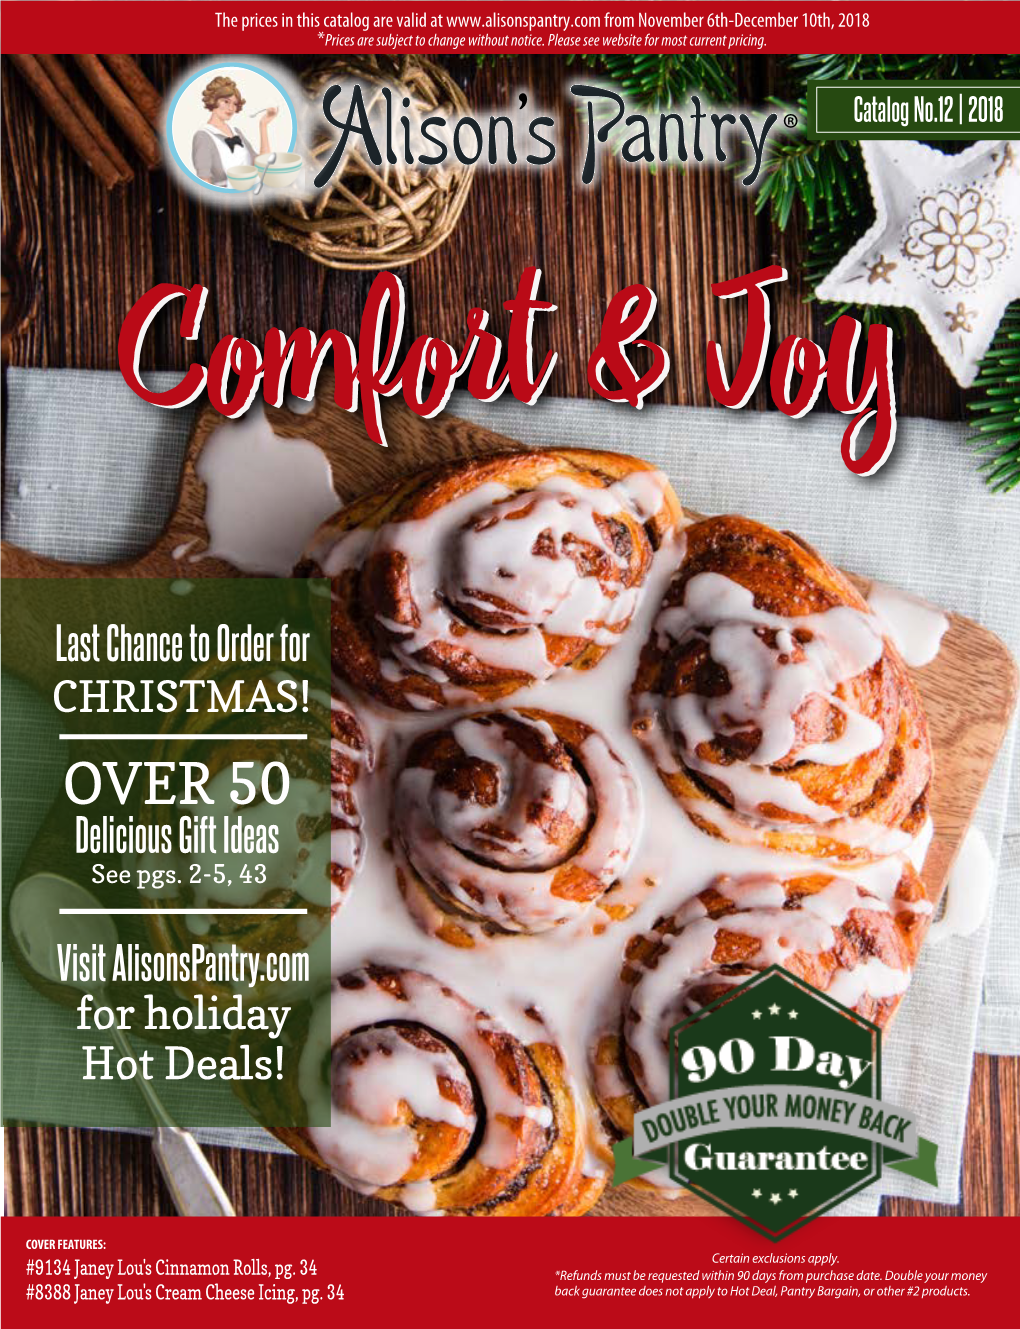 OVER 50 Delicious Gift Ideas See Pgs